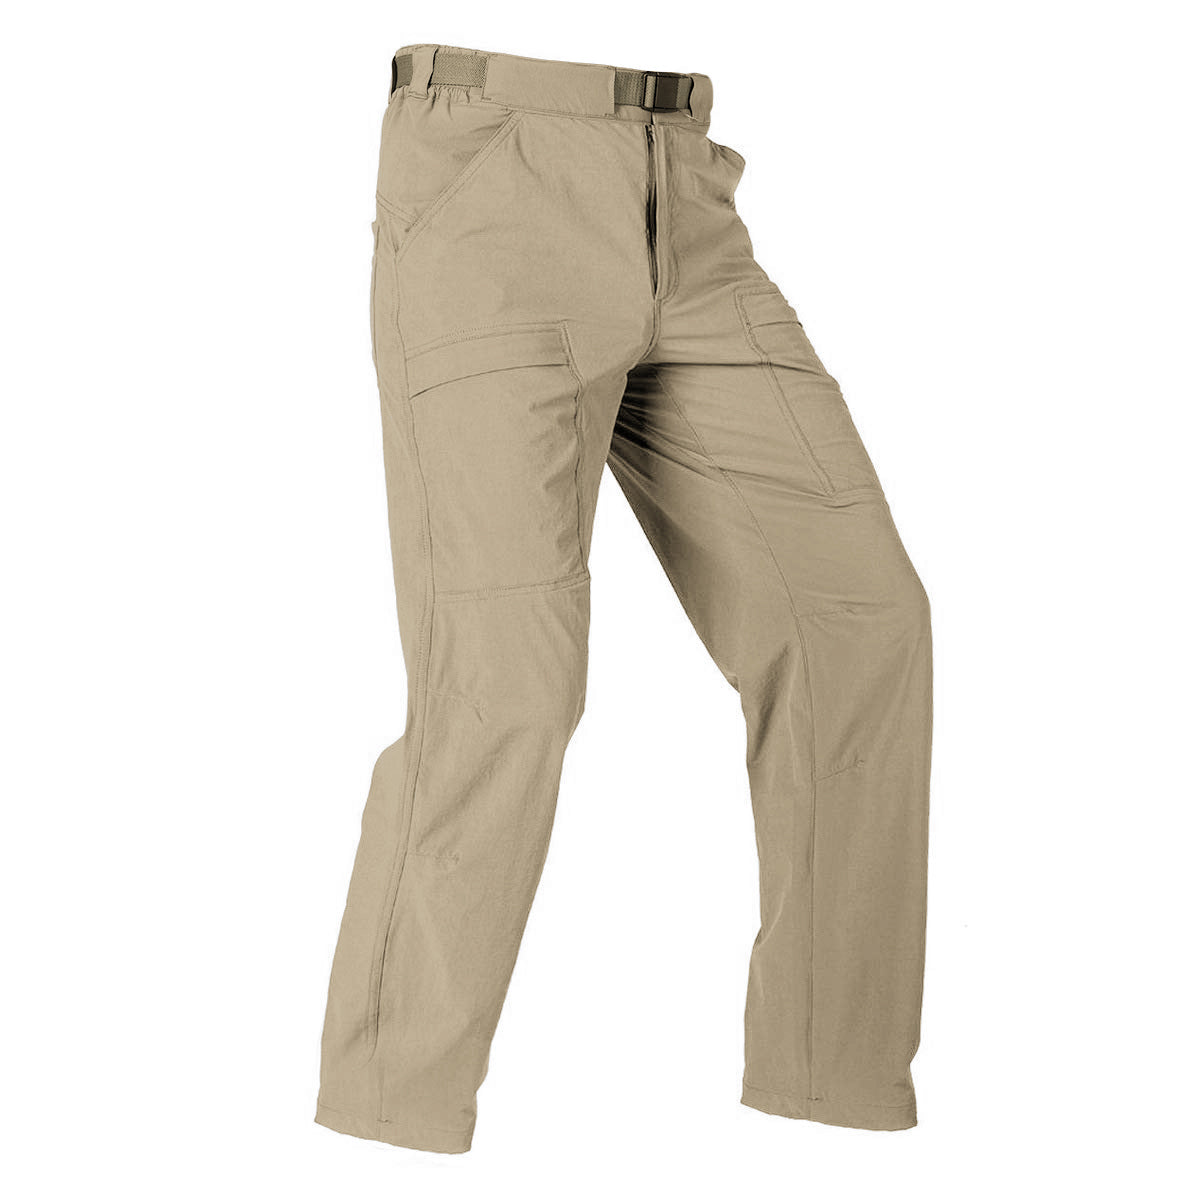  NOUKOW Mens Outdoor Hiking Pants, Quick Dry Lightweight  Tactical Pants, Water Resistant Stretch Fishing Pants